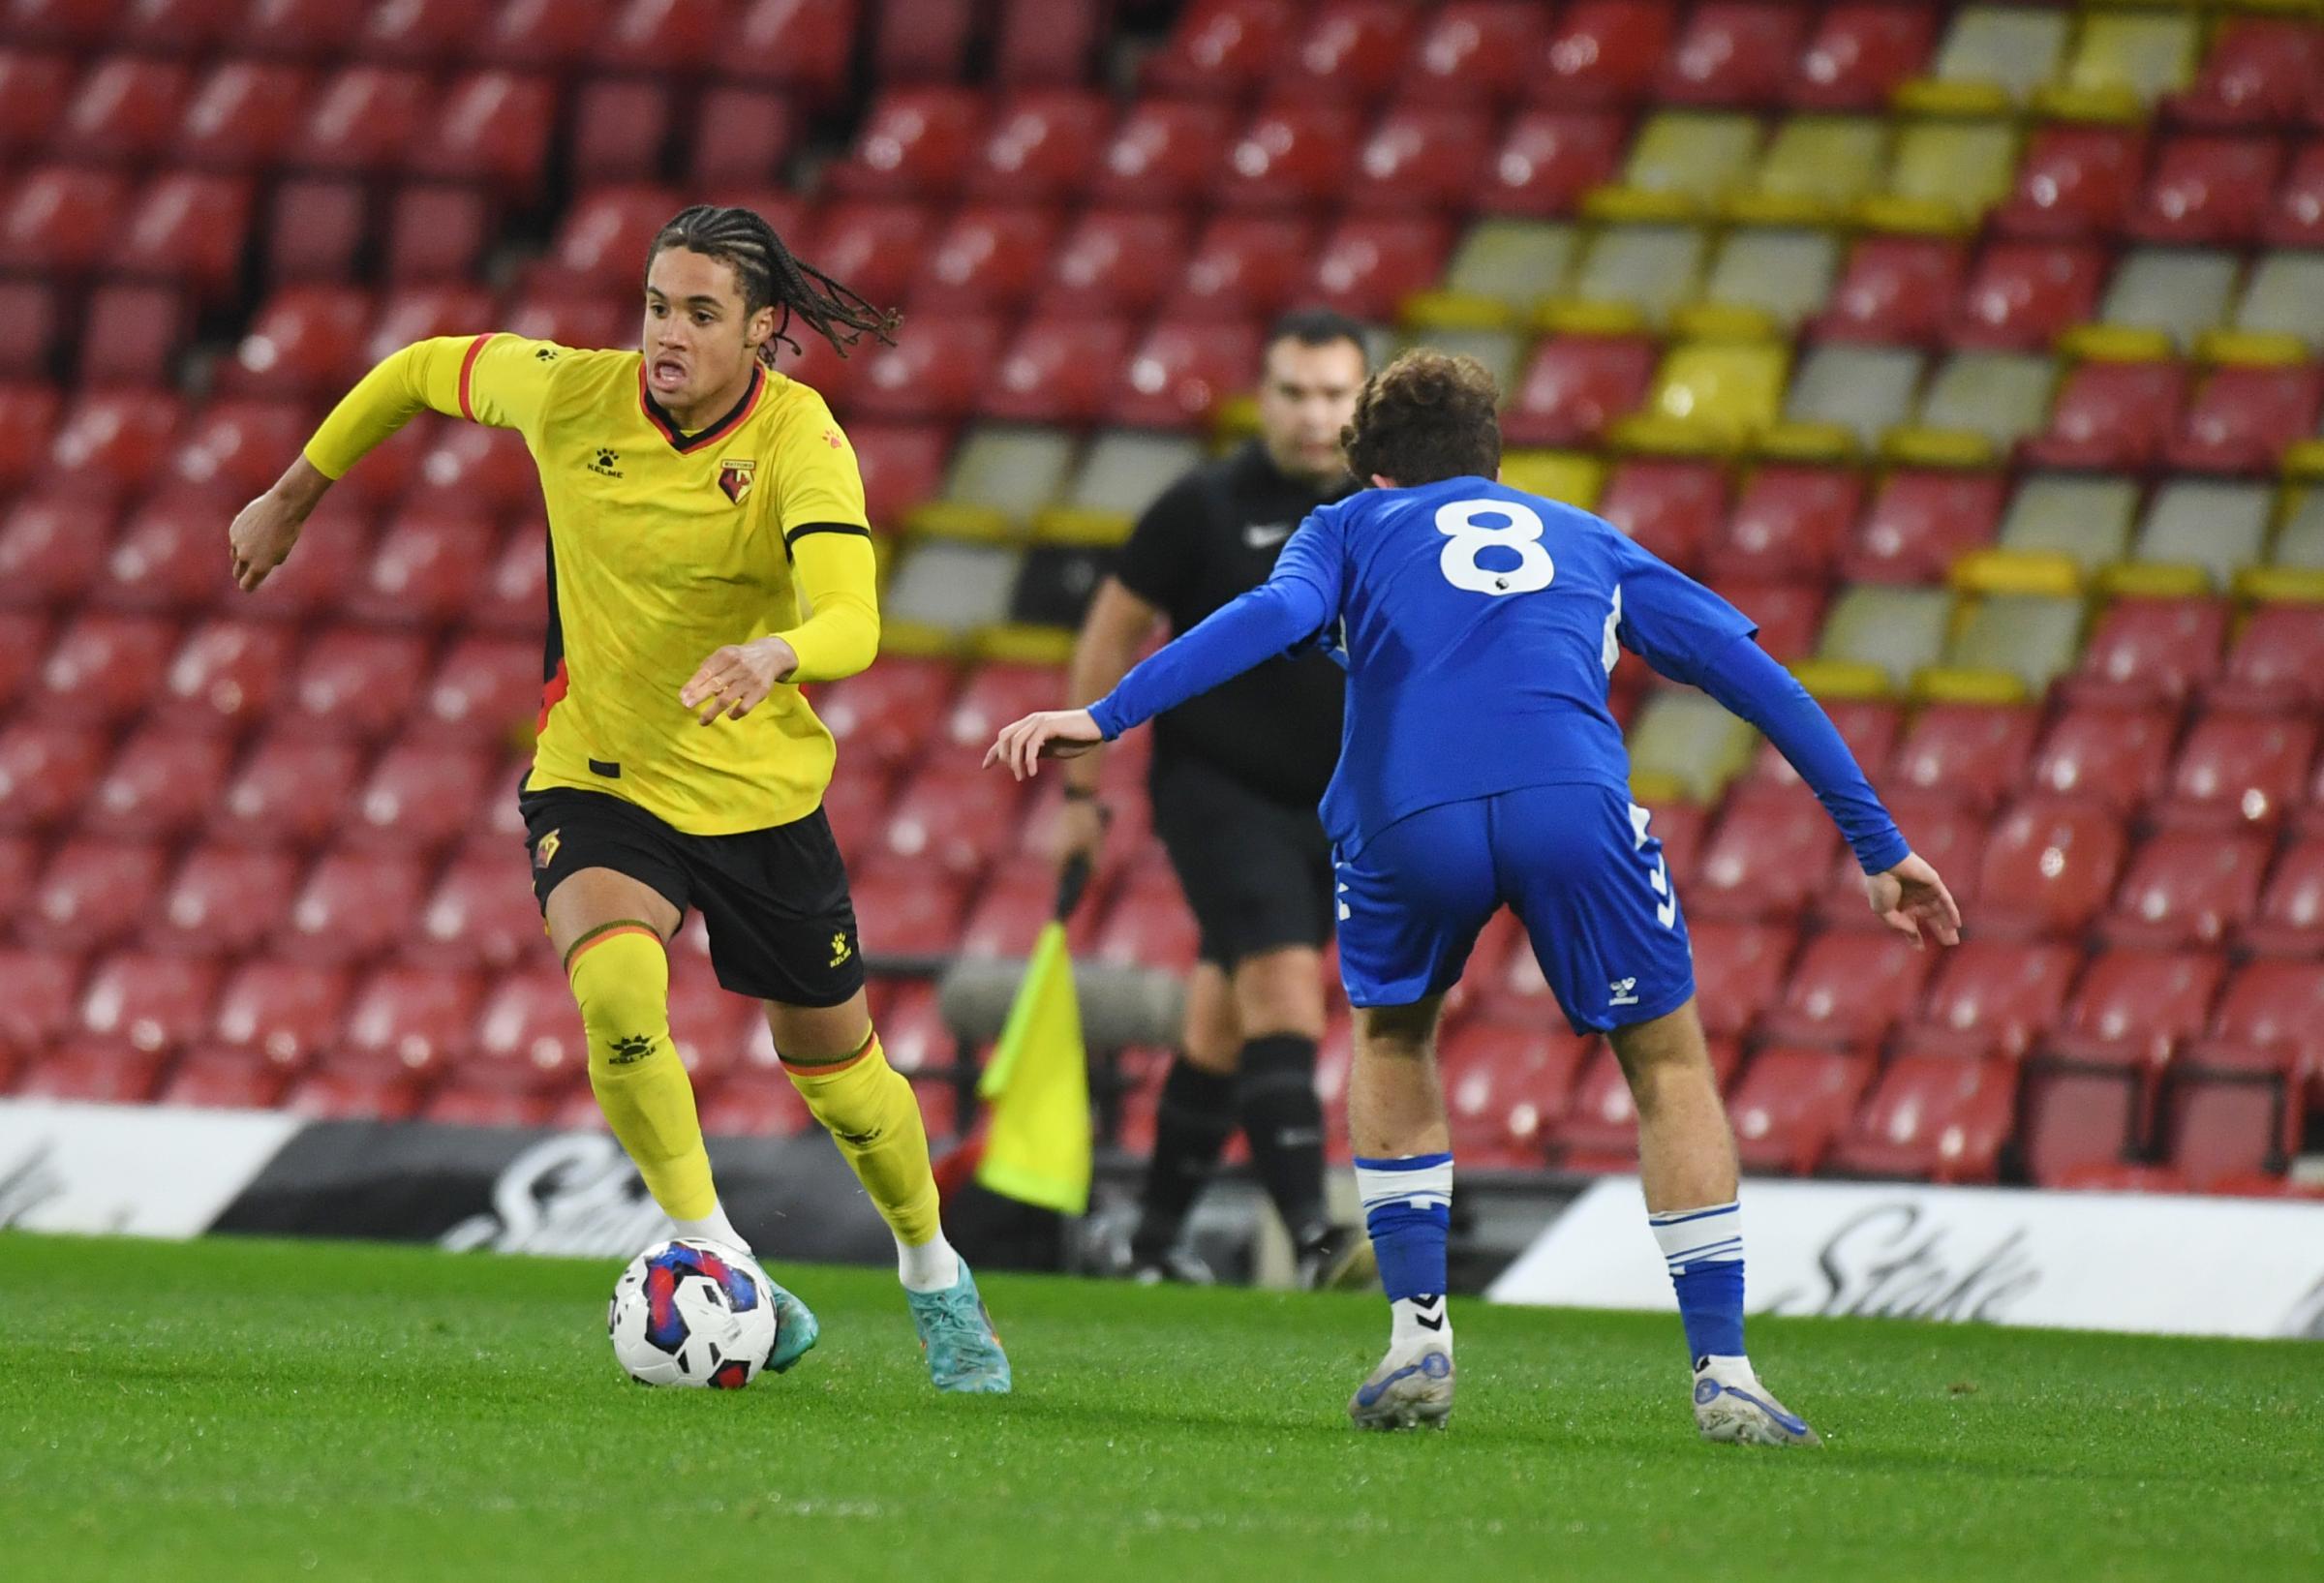 Watford host Arsenal in FA Youth Cup Fifth Round tie